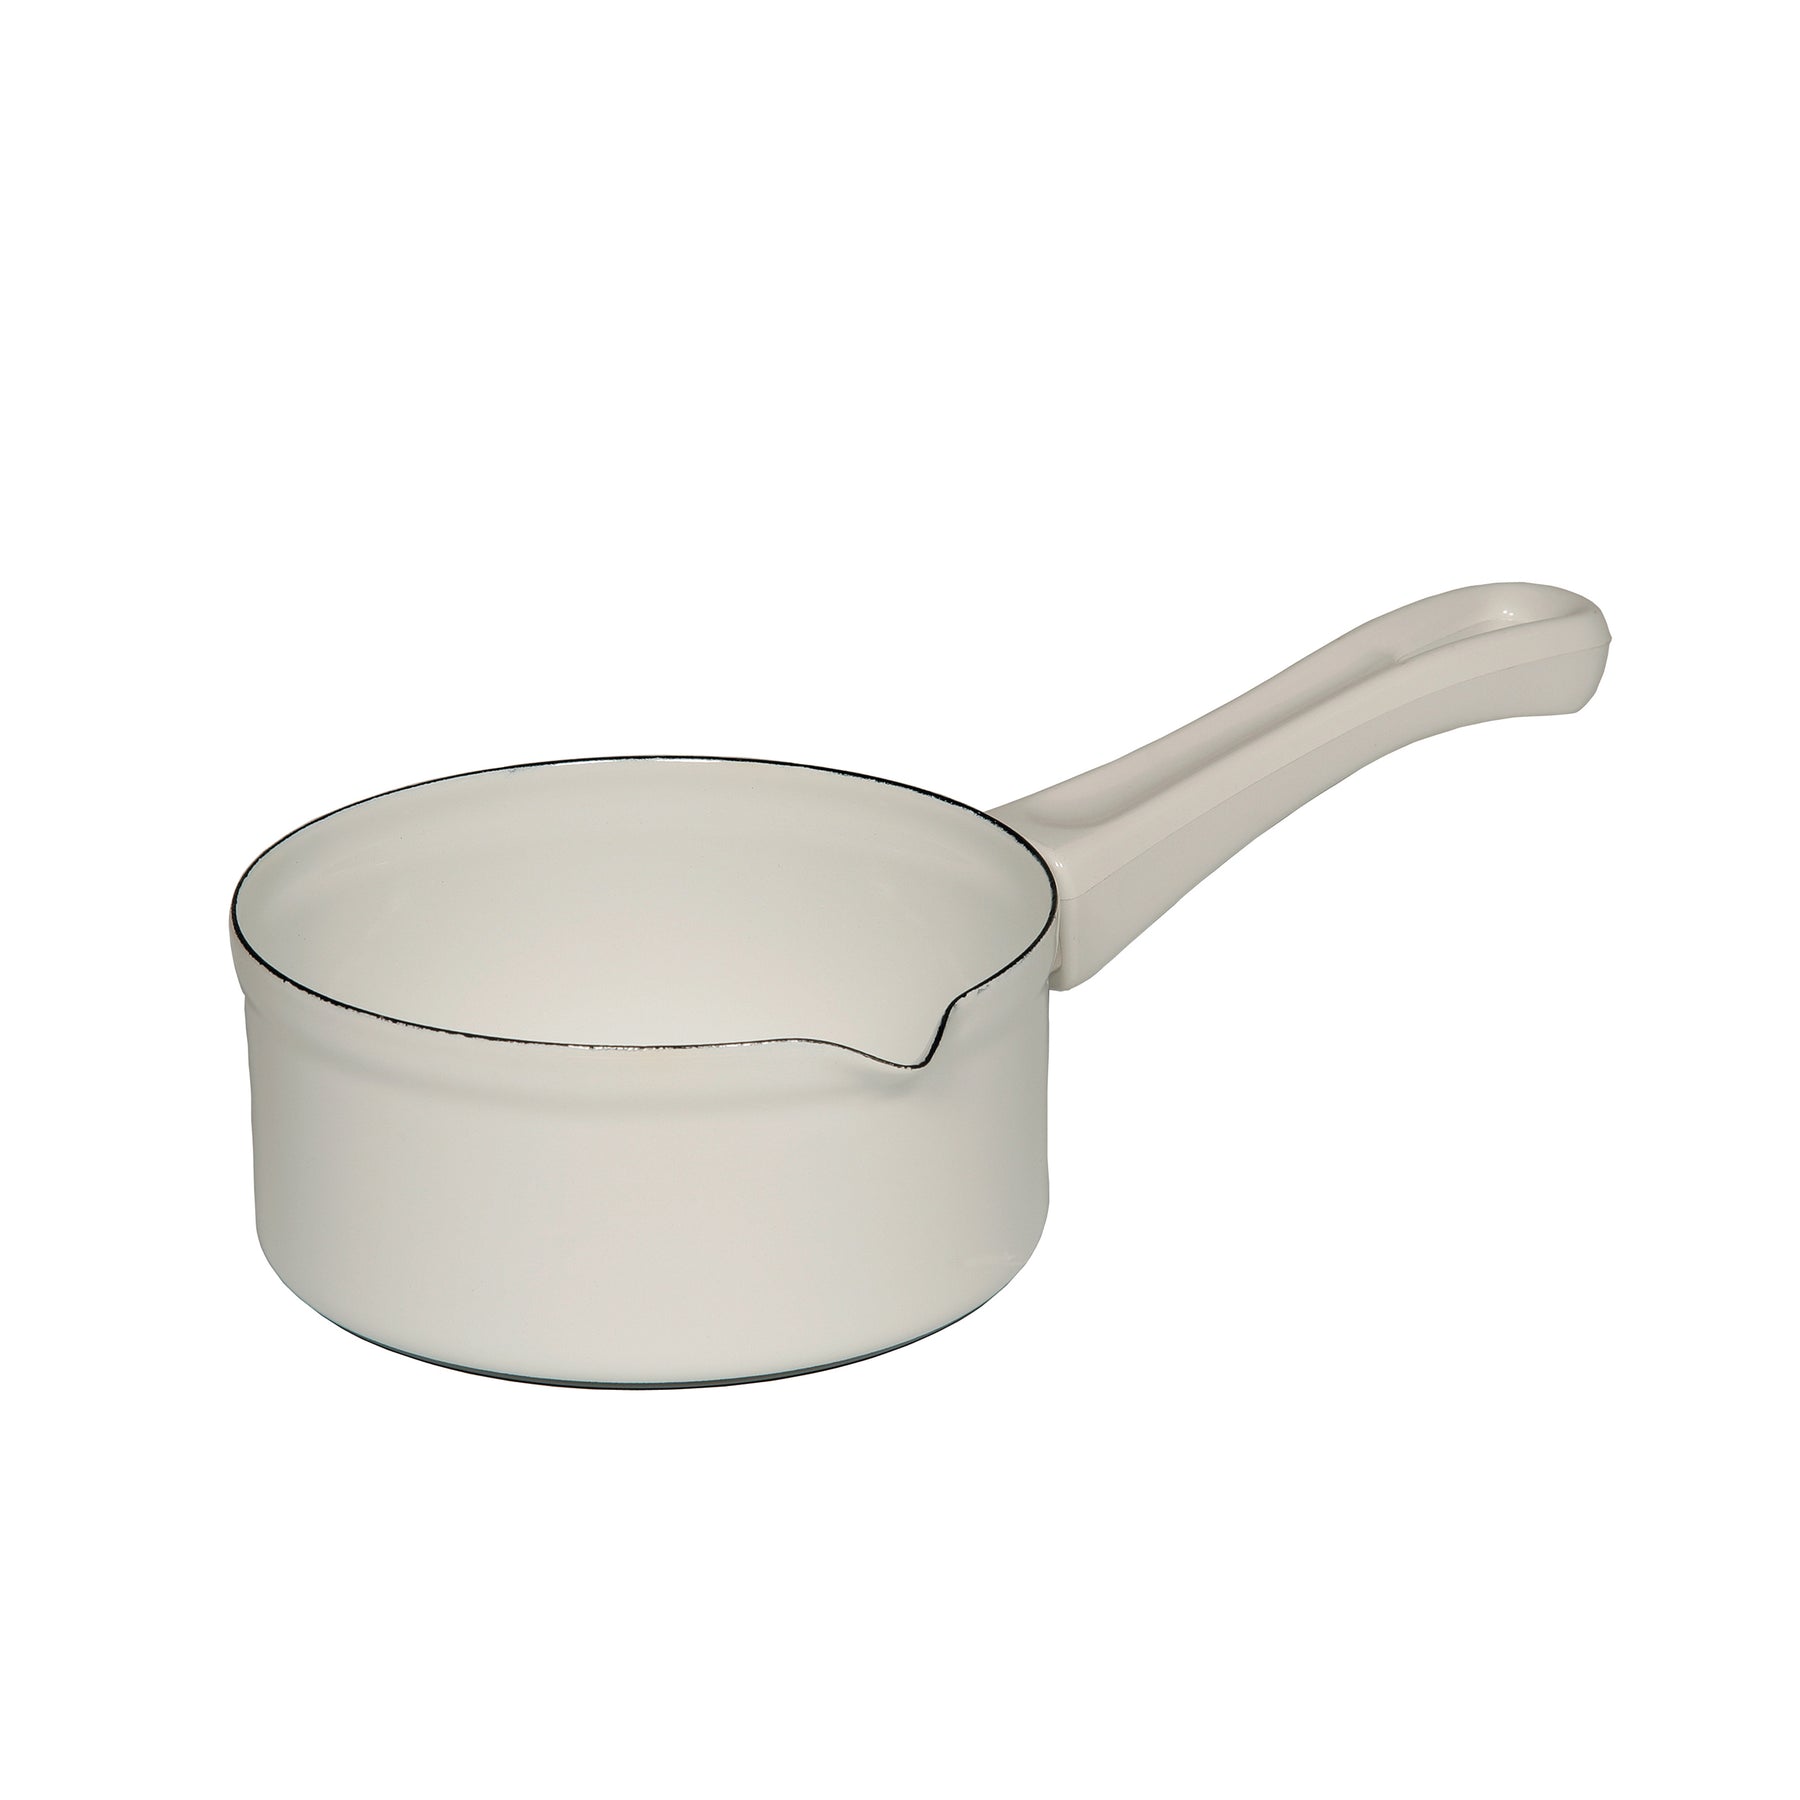 AMEICO - Official US Distributor of Riess - .5L Saucepan with Spout